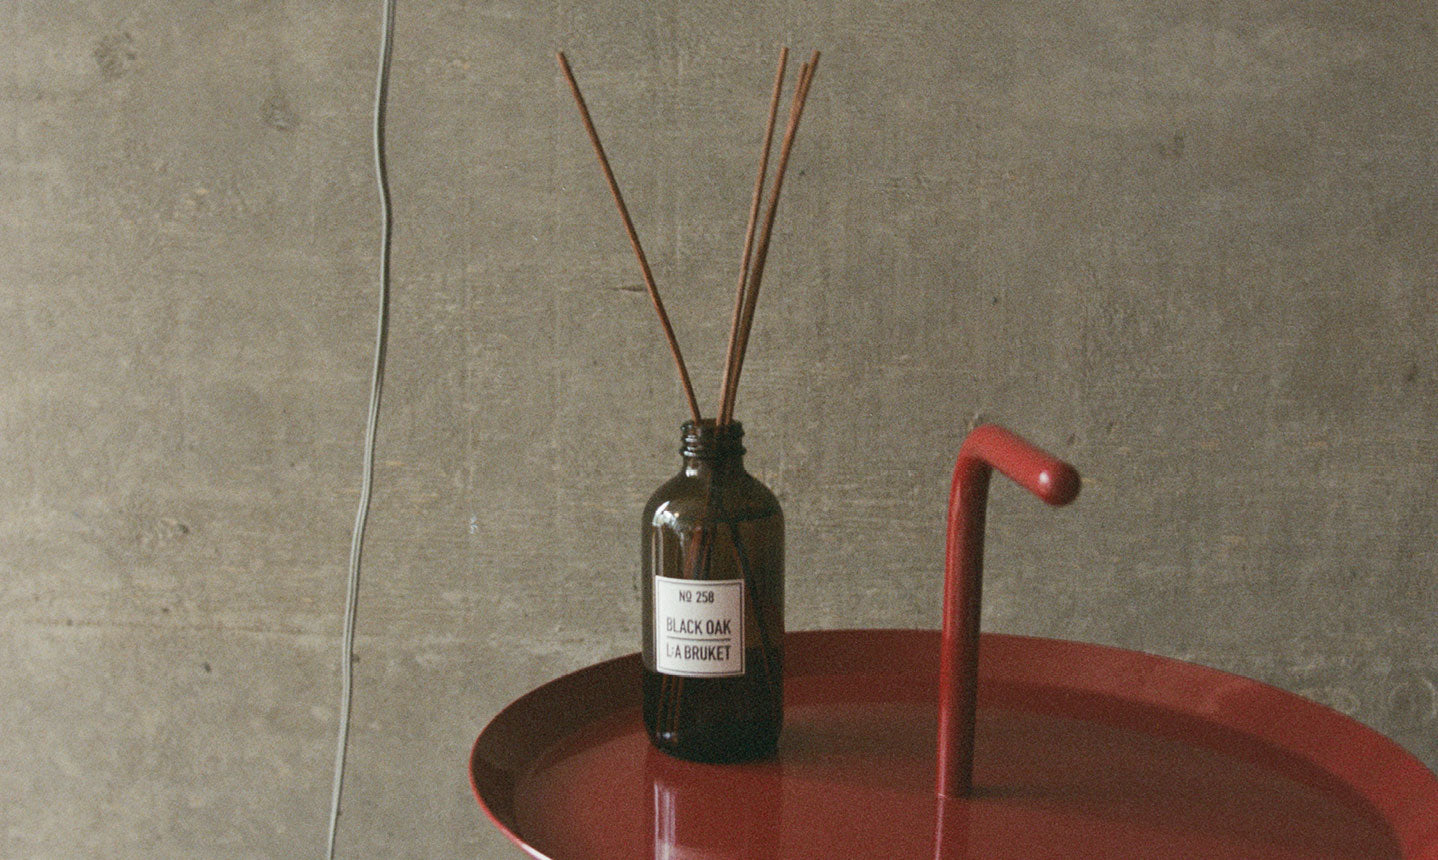 Load video: &lt;p&gt;&lt;span class=&quot;metafield-multi_line_text_field&quot;&gt;Put the sticks in the solubiliser liquid and let soak for a while. Turn them around after 30 minutes and make sure not to spill the liquid. Place the bottle in a safe place away from direct sunlight.&lt;/span&gt;&lt;/p&gt;